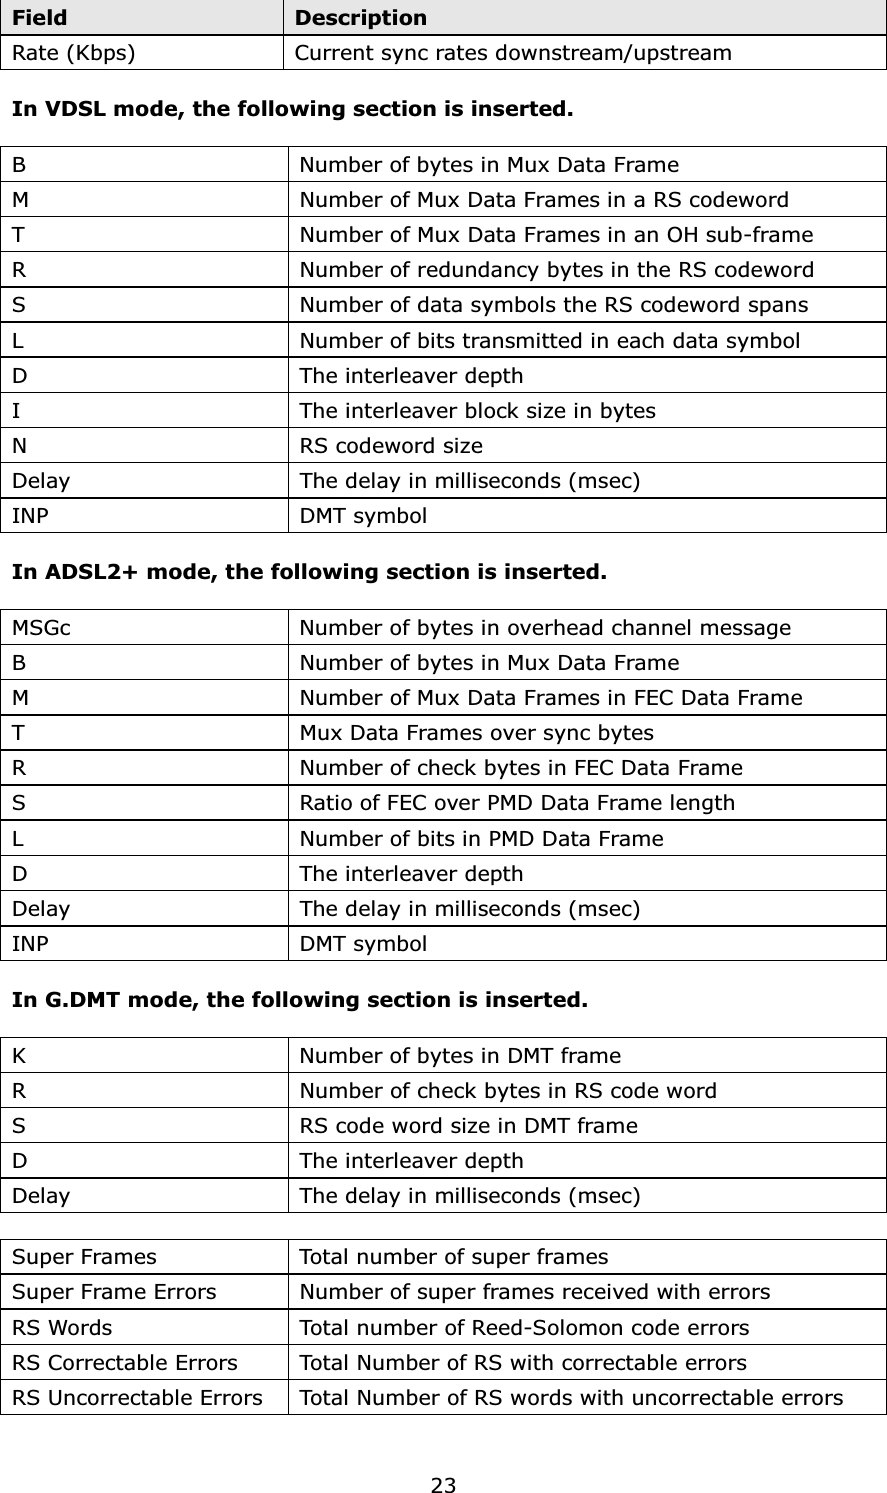 23Field DescriptionRate (Kbps) Current sync rates downstream/upstream In VDSL mode, the following section is inserted.B Number of bytes in Mux Data FrameM Number of Mux Data Frames in a RS codewordT Number of Mux Data Frames in an OH sub-frameR Number of redundancy bytes in the RS codewordS Number of data symbols the RS codeword spansL  Number of bits transmitted in each data symbolD  The interleaver depthI The interleaver block size in bytesN RS codeword sizeDelay  The delay in milliseconds (msec)INP DMT symbolIn ADSL2+ mode, the following section is inserted.MSGc Number of bytes in overhead channel messageB Number of bytes in Mux Data FrameM Number of Mux Data Frames in FEC Data FrameT Mux Data Frames over sync bytesR Number of check bytes in FEC Data FrameS Ratio of FEC over PMD Data Frame lengthL  Number of bits in PMD Data FrameD  The interleaver depthDelay  The delay in milliseconds (msec)INP DMT symbolIn G.DMT mode, the following section is inserted.K Number of bytes in DMT frameR Number of check bytes in RS code wordS RS code word size in DMT frameD The interleaver depthDelay The delay in milliseconds (msec)Super Frames Total number of super framesSuper Frame Errors Number of super frames received with errorsRS Words Total number of Reed-Solomon code errorsRS Correctable Errors Total Number of RS with correctable errorsRS Uncorrectable Errors  Total Number of RS words with uncorrectable errors